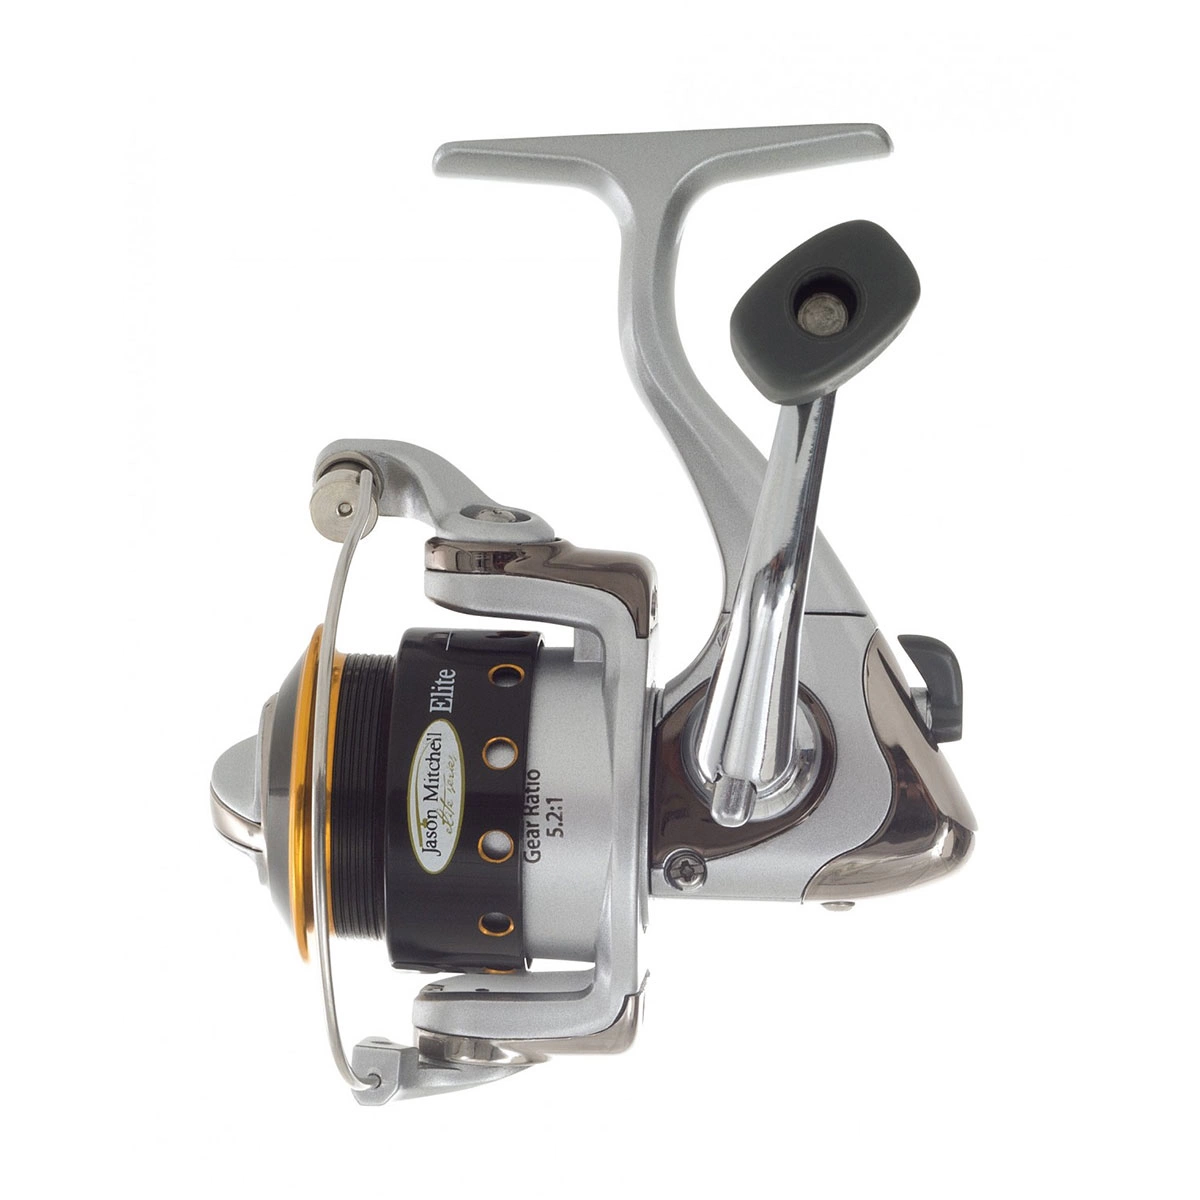 https://discounttoday.net/wp-content/uploads/2022/12/Clam-Jason-Mitchell-Elite-Series-Spinning-Ice-Fishing-Reel.webp